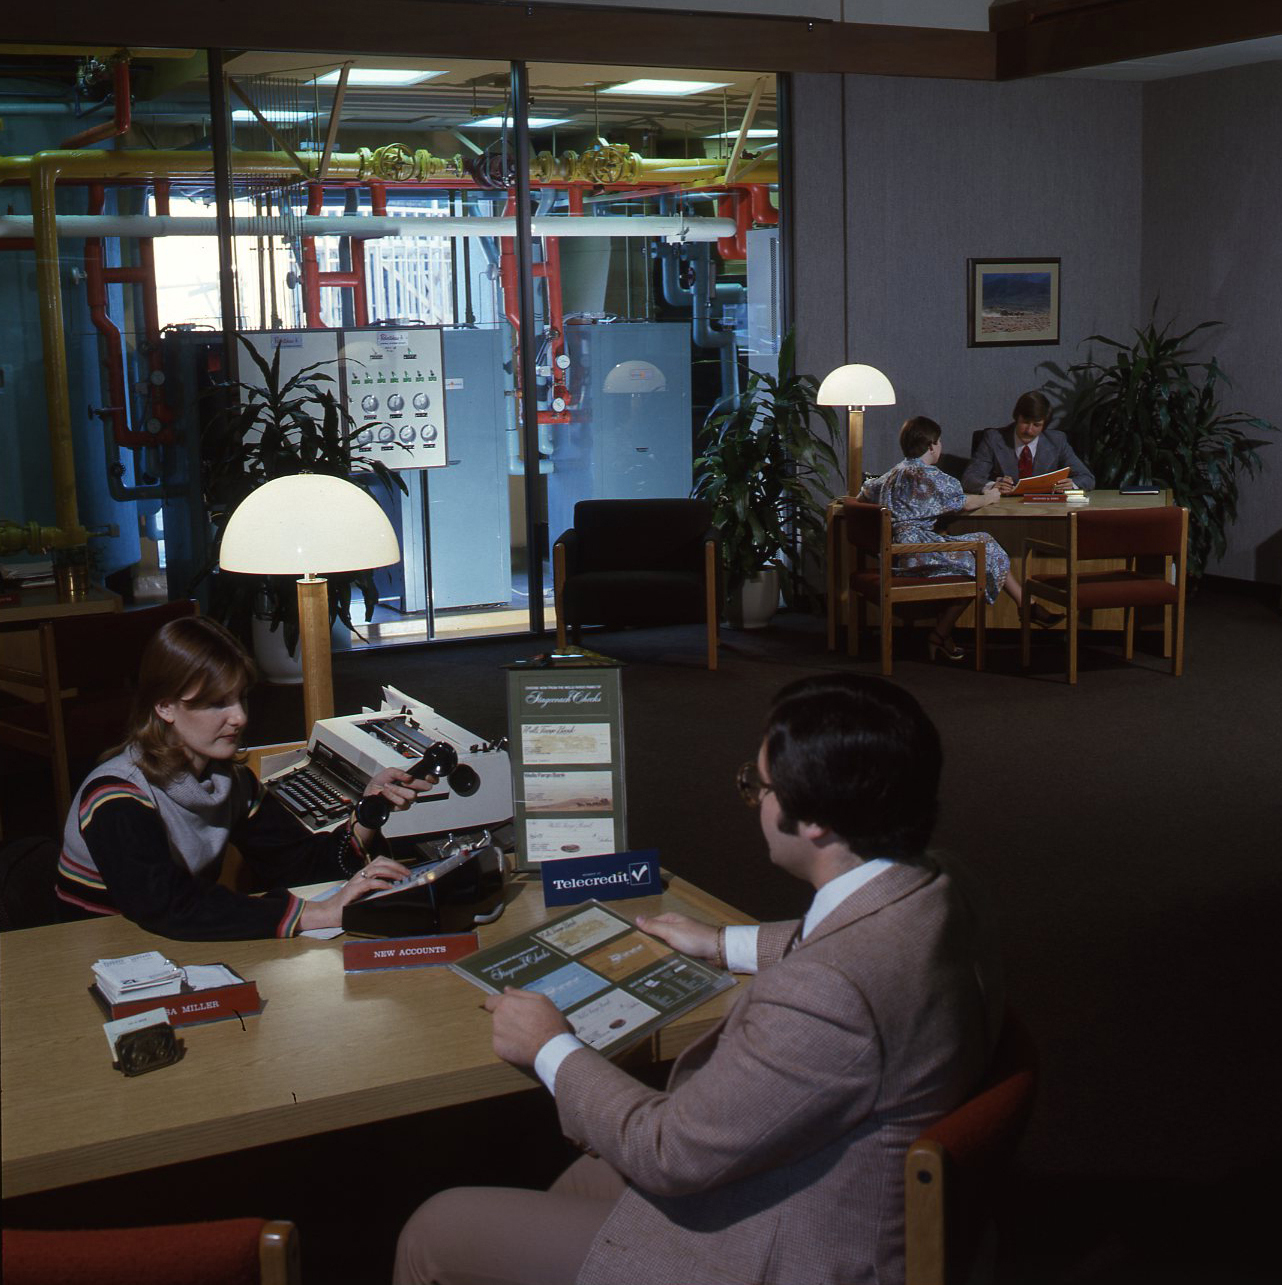 People seated at desks. In the background, red tubing is seen behind a glass wall.